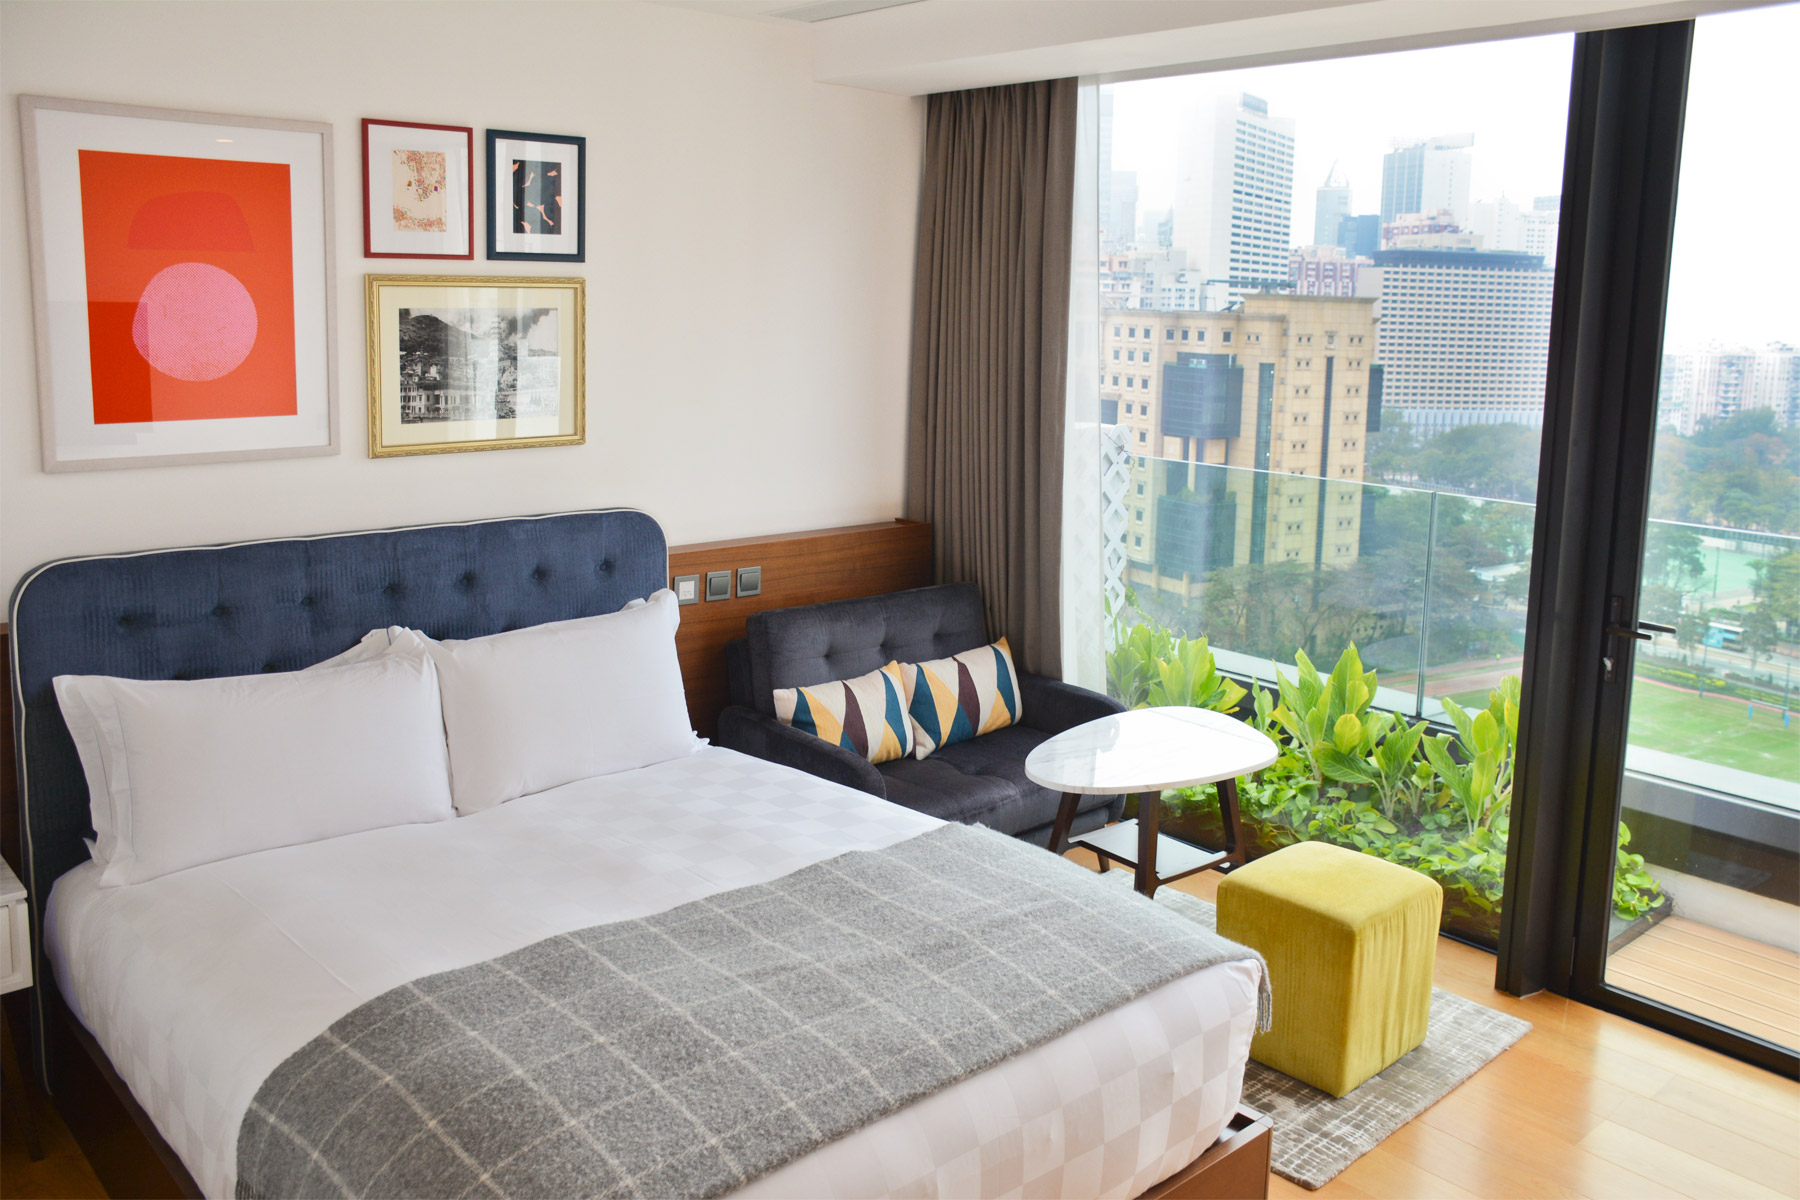 Lessons from Little Tai Hang: How to turn a hotel into a home